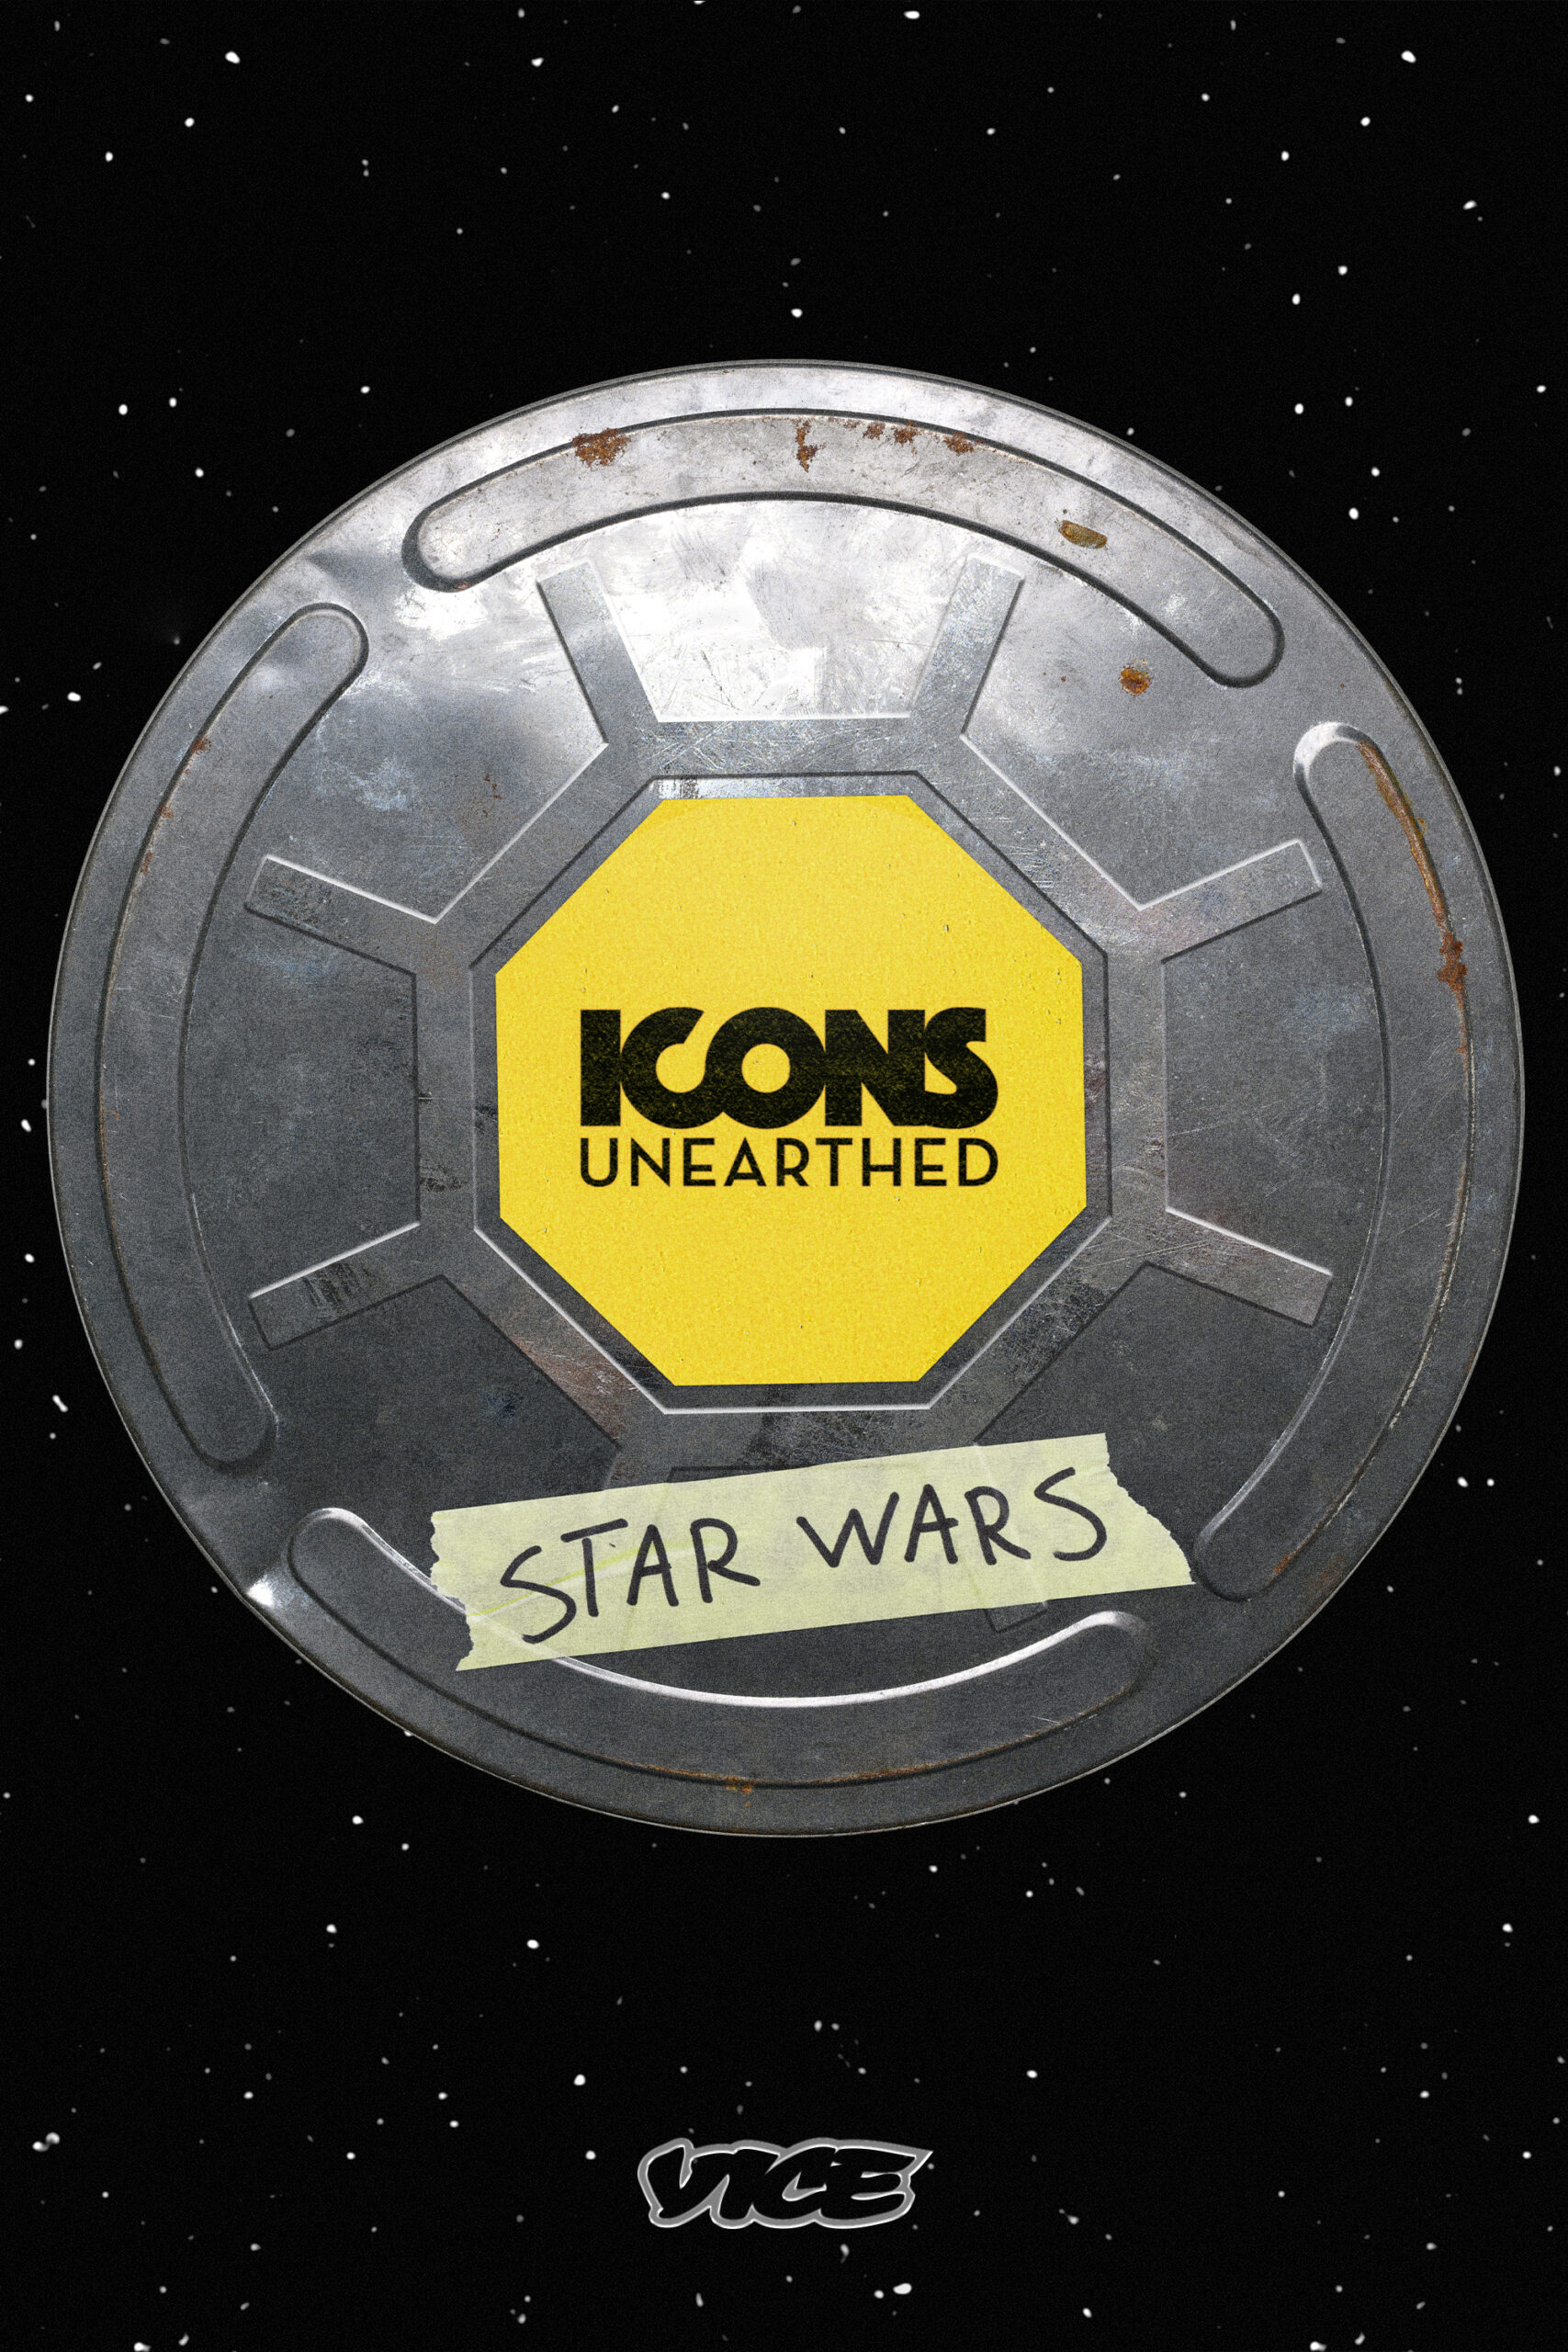 Icons Unearthed Episode 4 Release Date